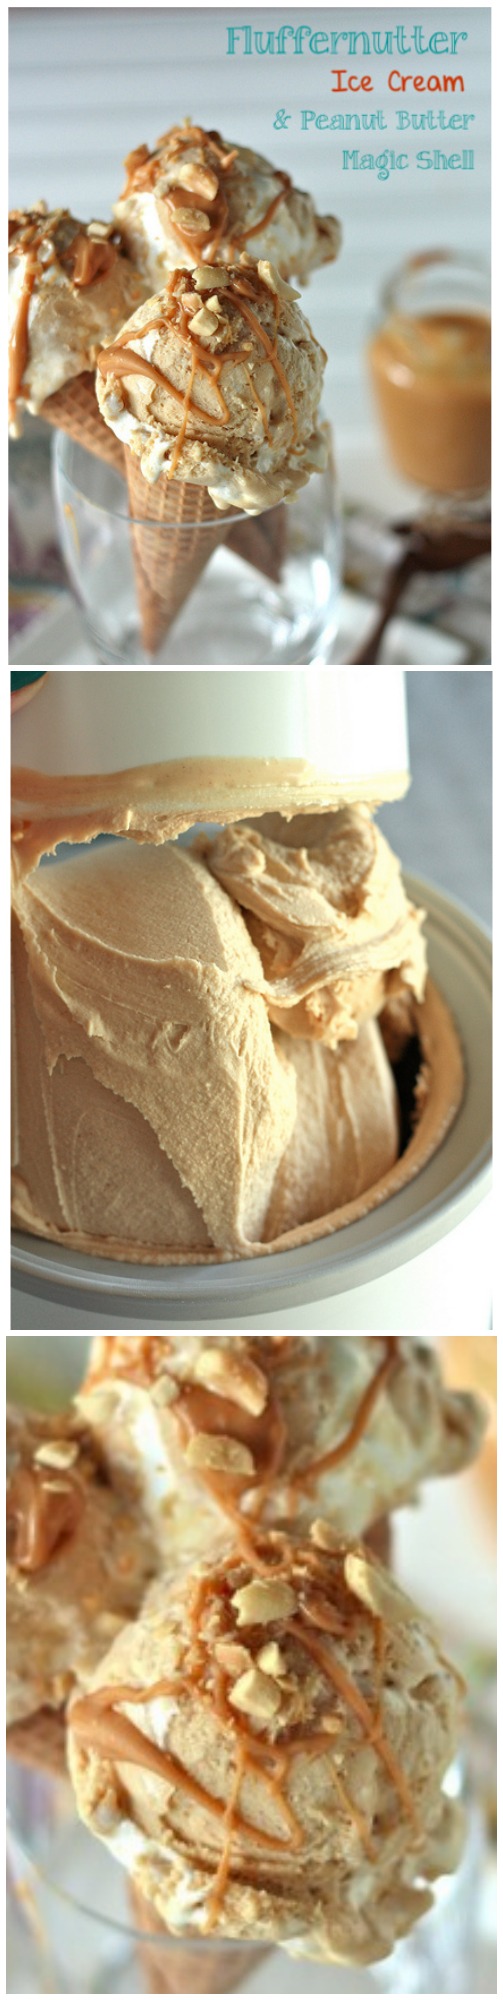 Fluffernutter Ice cream and 2-Ingredient Peanut Butter Magic Shell - www.countrycleaver.com